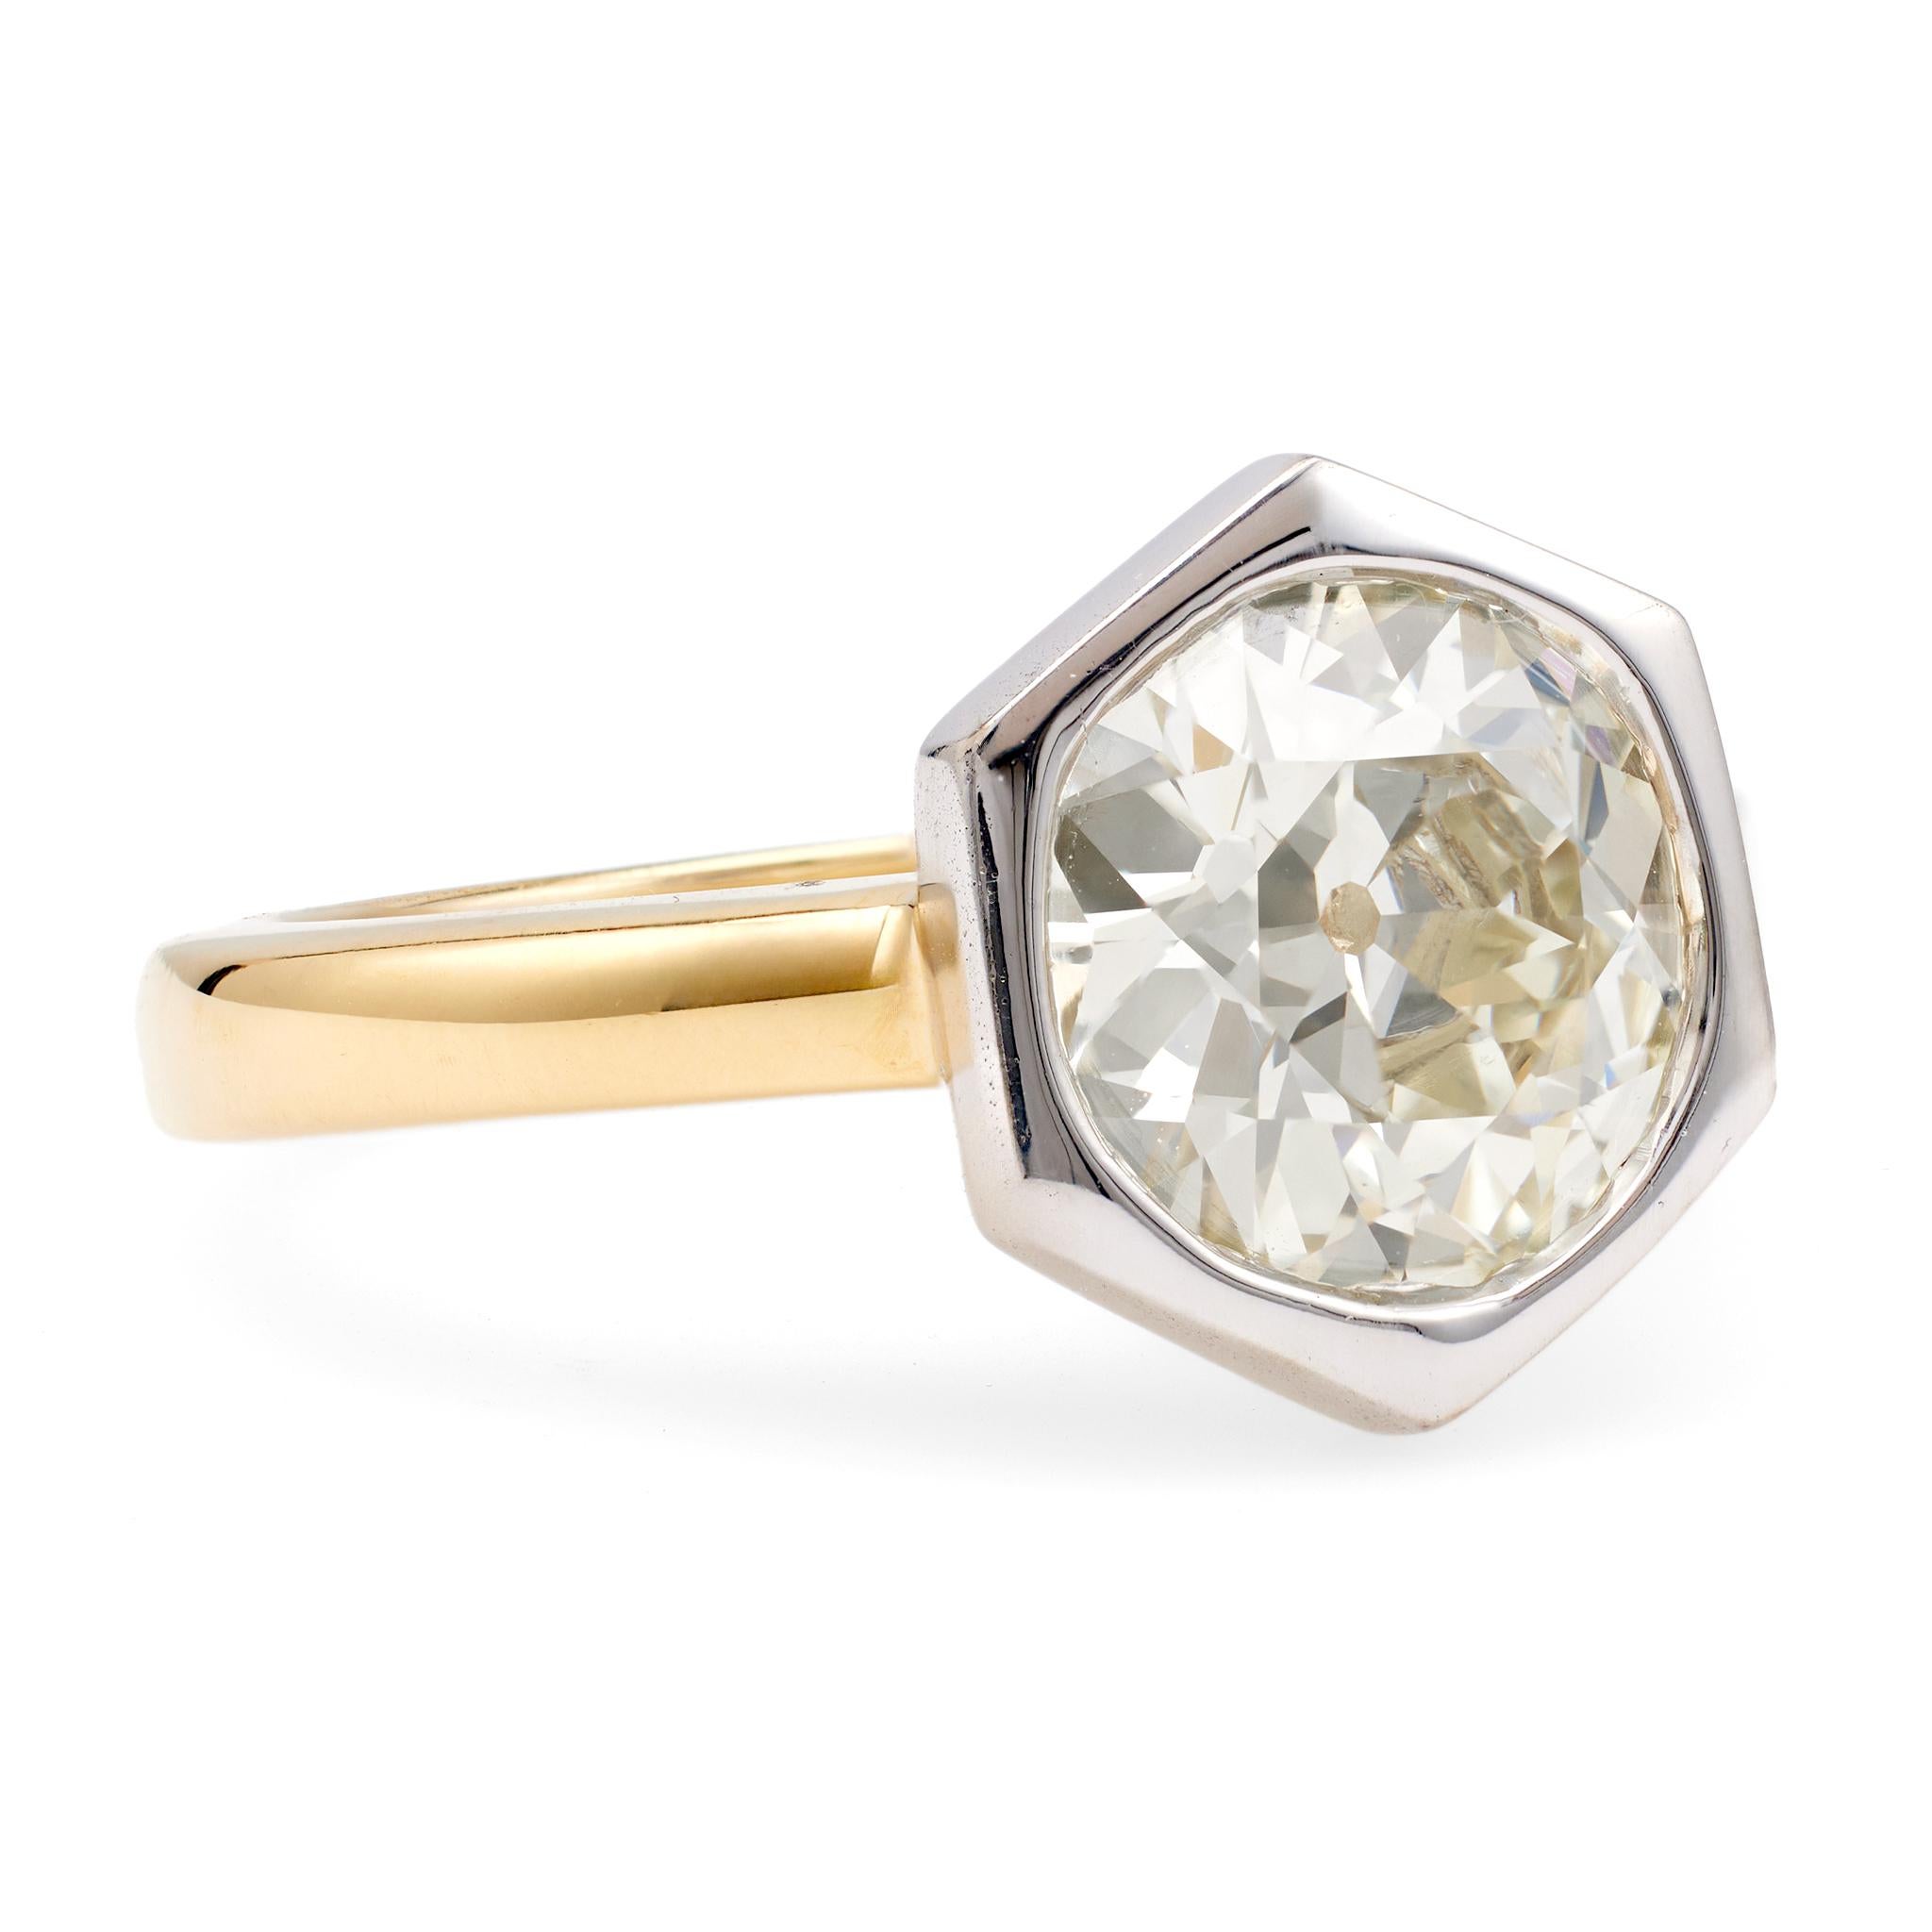 One French GIA 3.21 Carat Old European Cut Diamond 18k Gold Solitaire Ring. Featuring one GIA old European cut diamond of 3.21 carats, accompanied by GIA #6234209311 stating the diamond is Q-R color, VS2 clarity. Crafted in 18 karat yellow and white